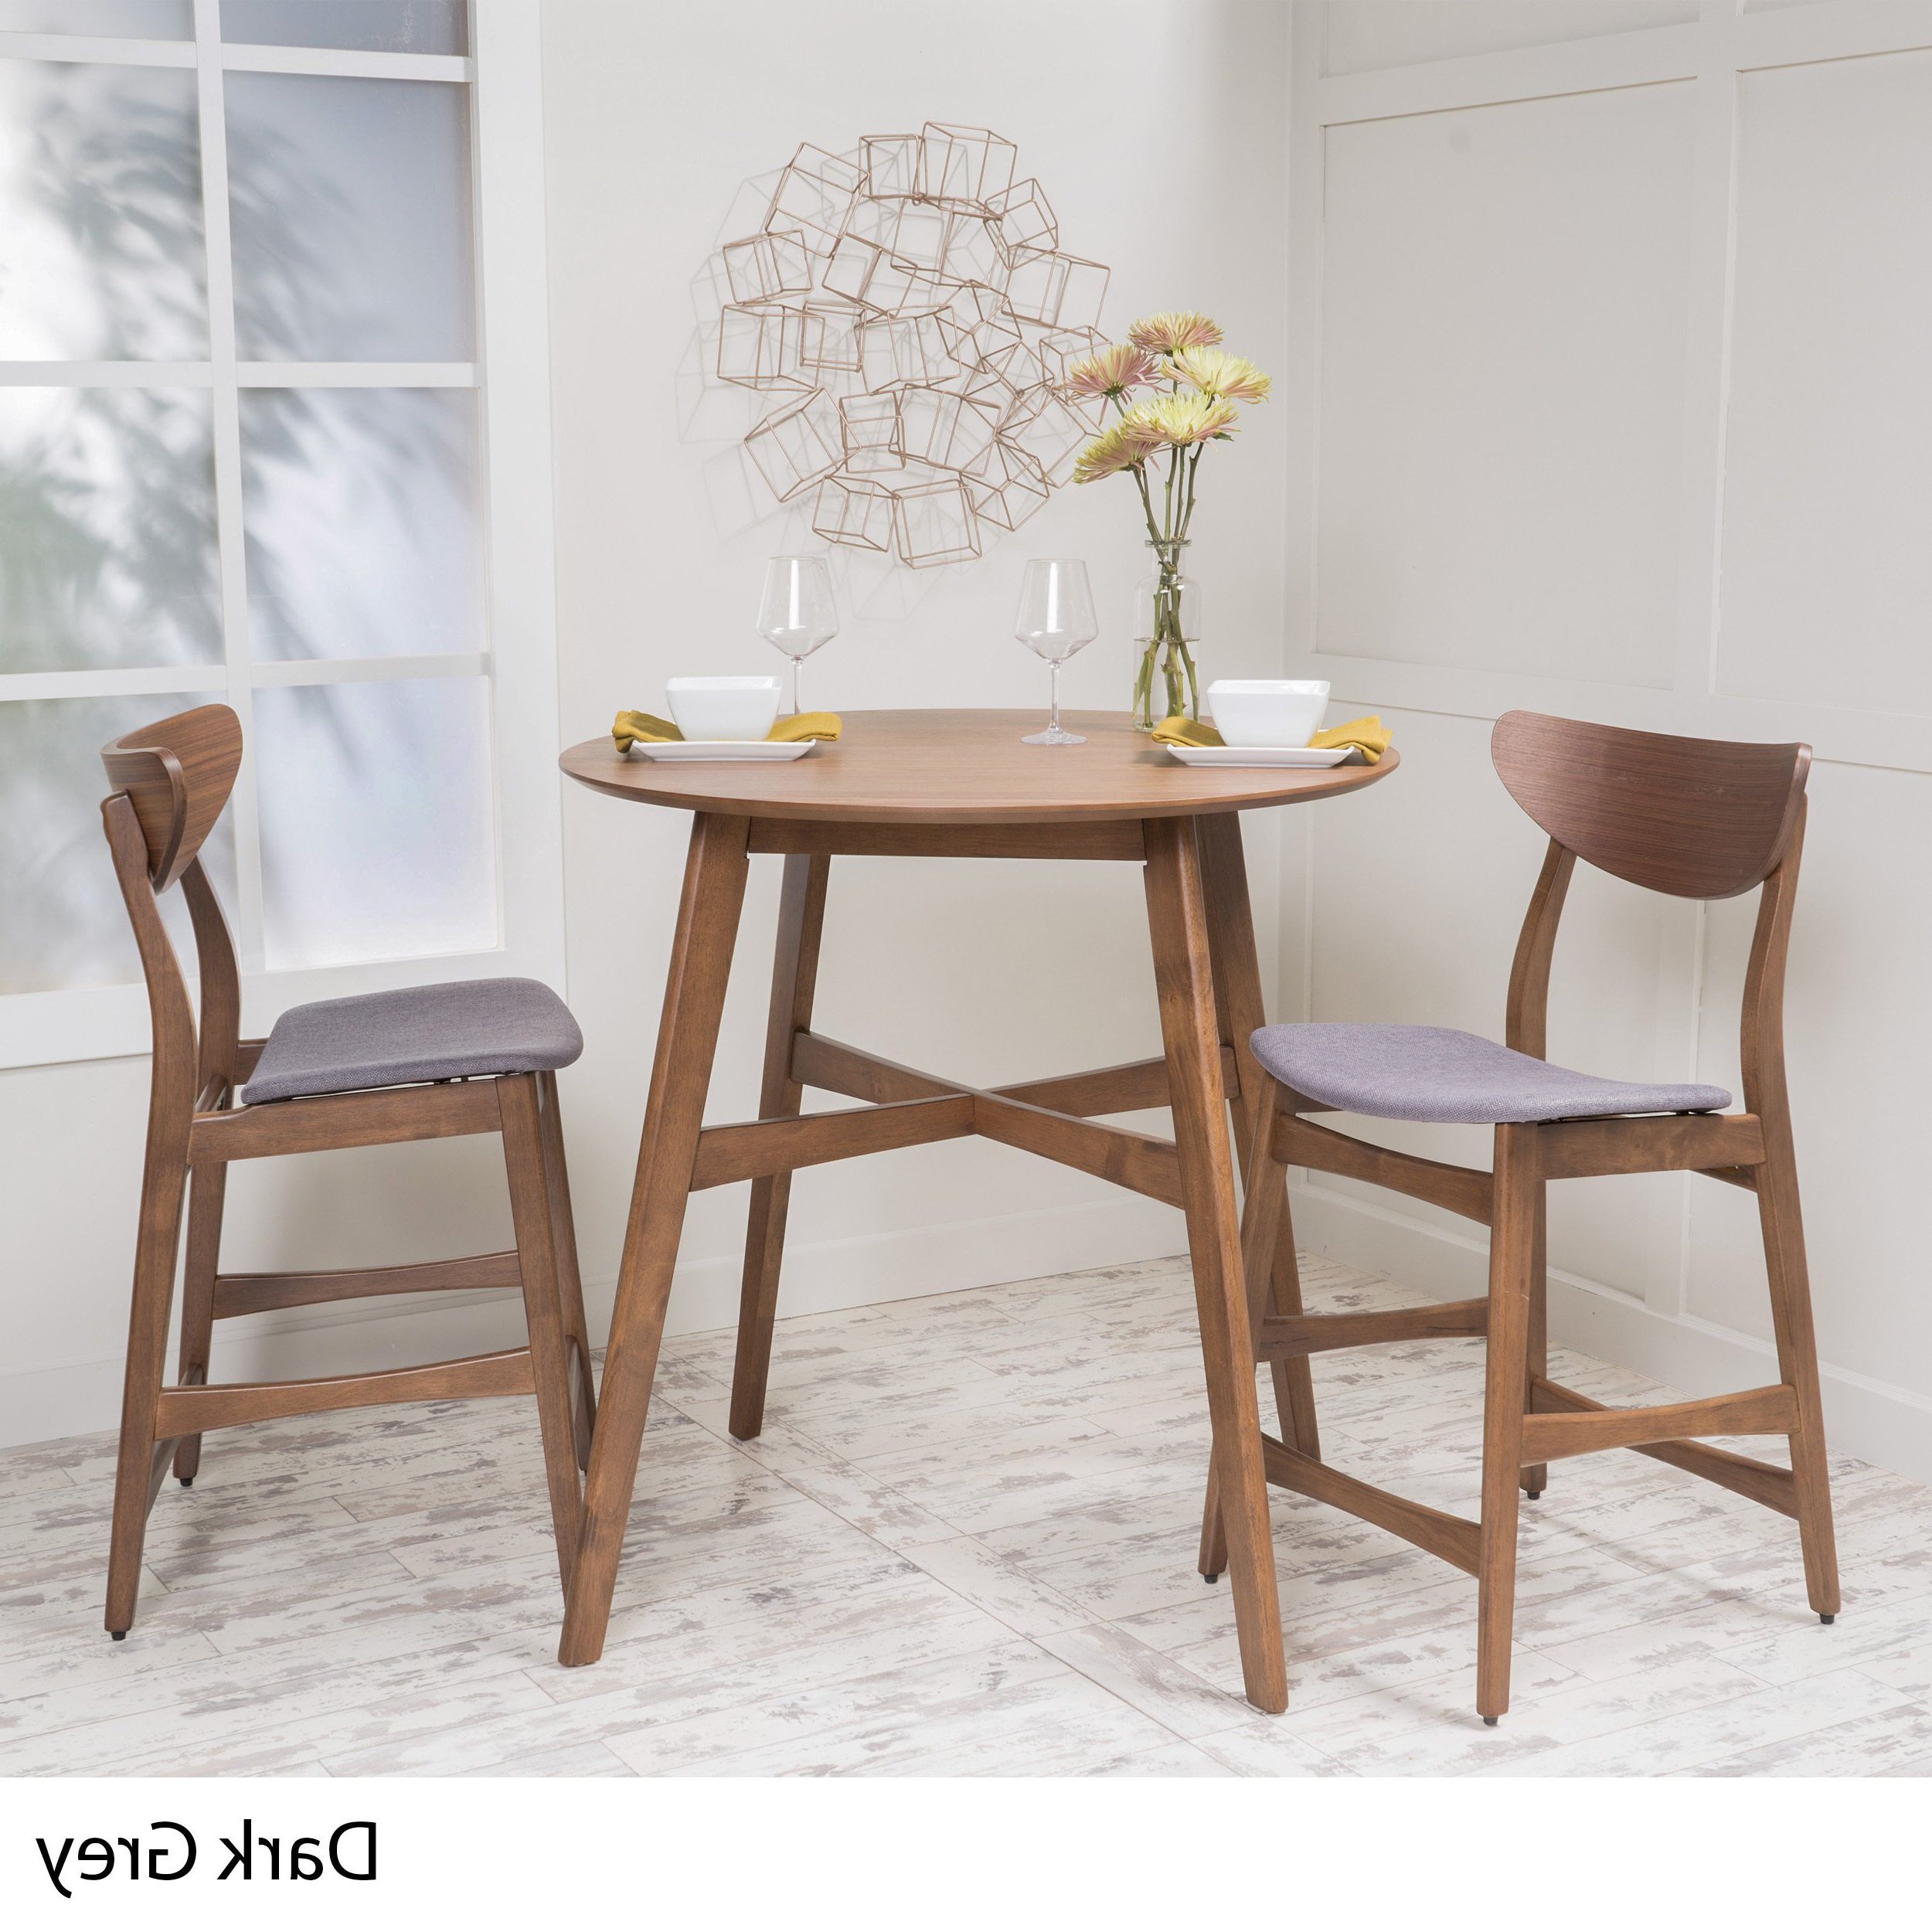 2020 Carson Counter Height Tables Intended For Carson Carrington Lund 3 Piece Wood Counter Height Round (View 18 of 25)